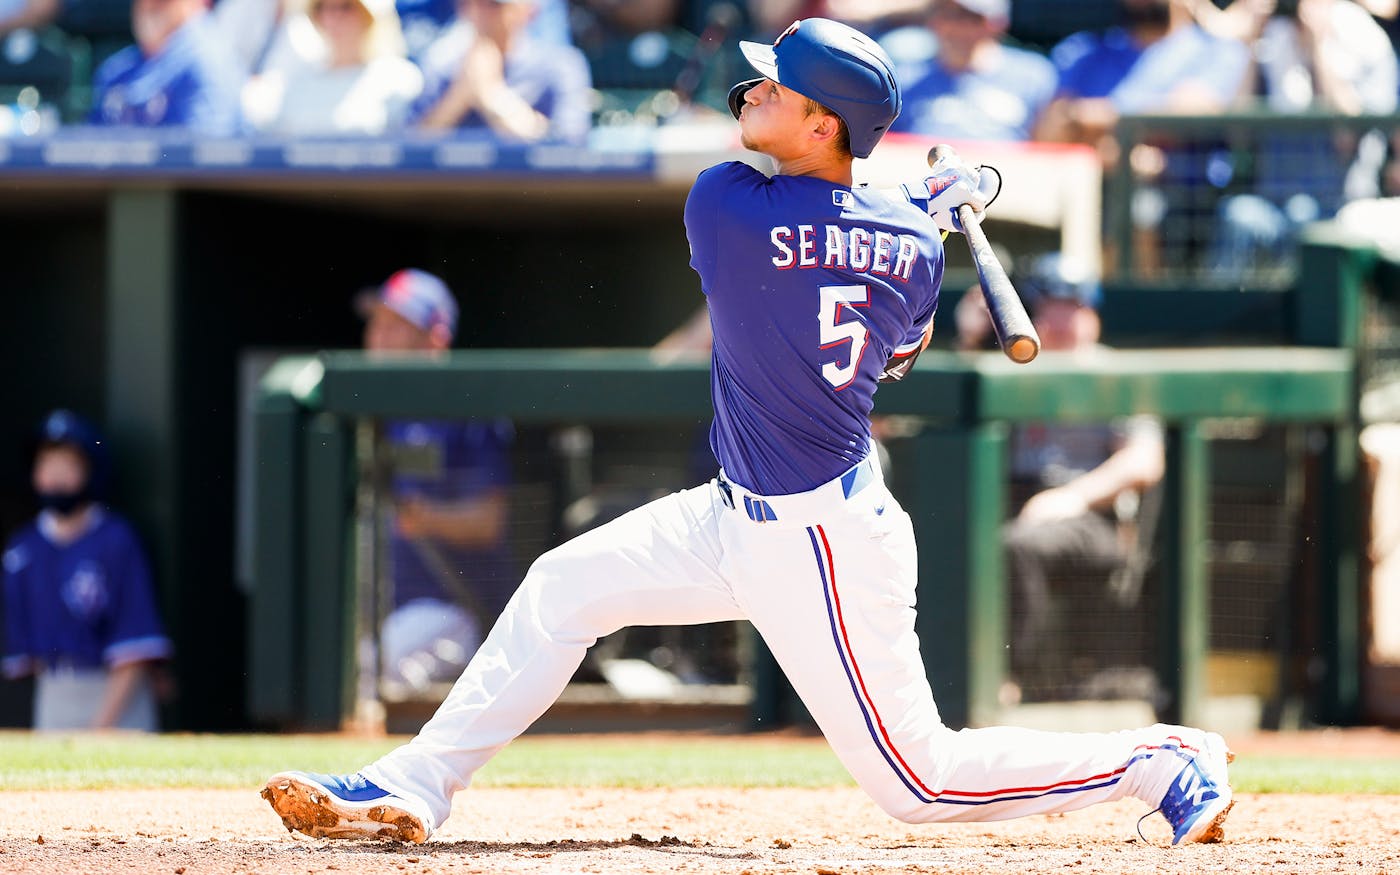 Being on Injured List 'Sucked' for Texas Rangers Star Corey Seager